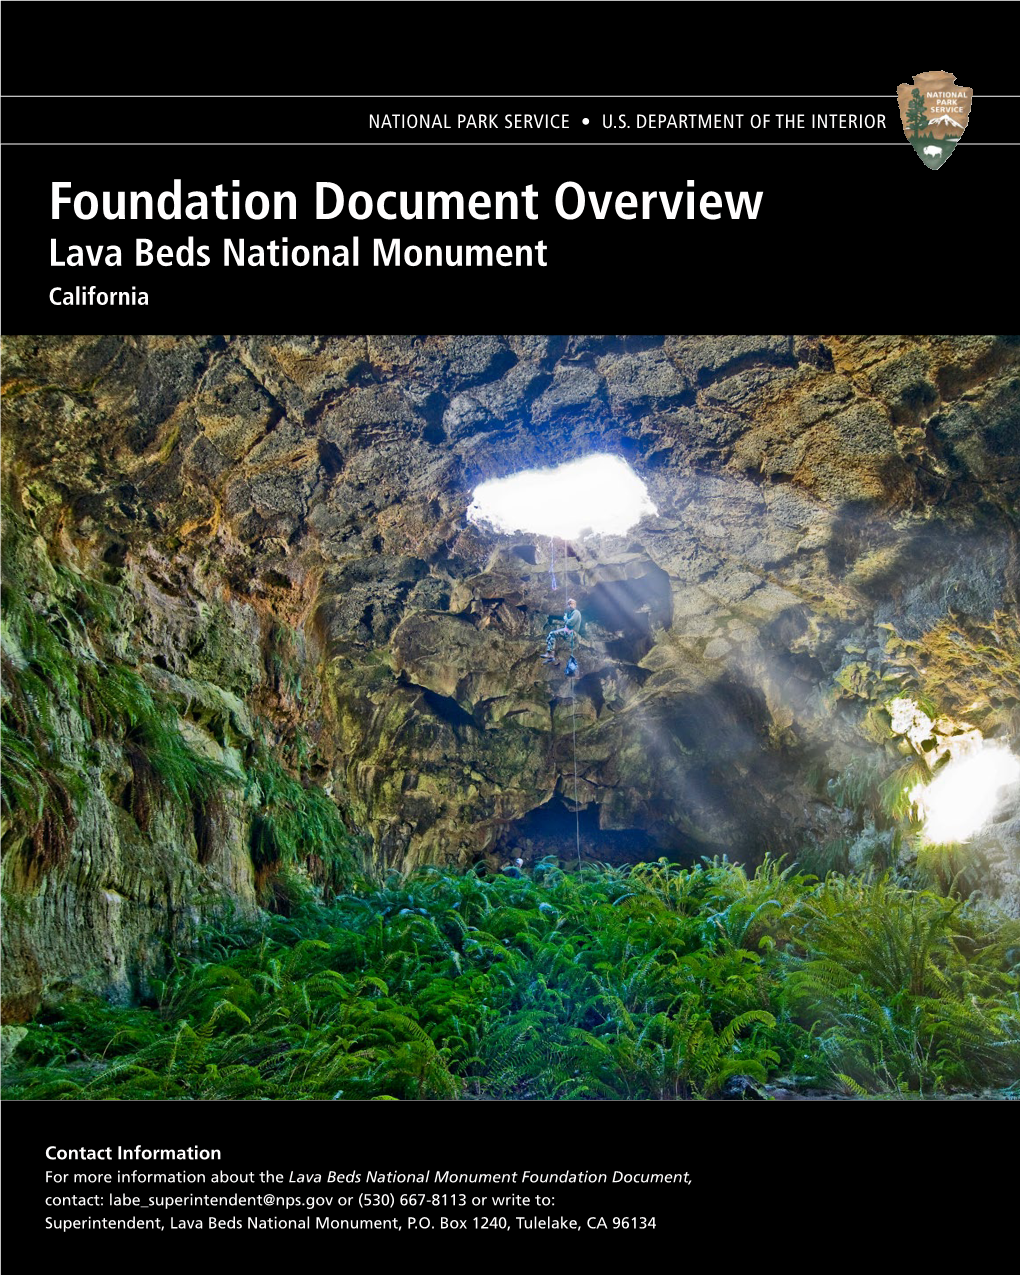 Foundation Document Overview, Lava Beds National Monument, California